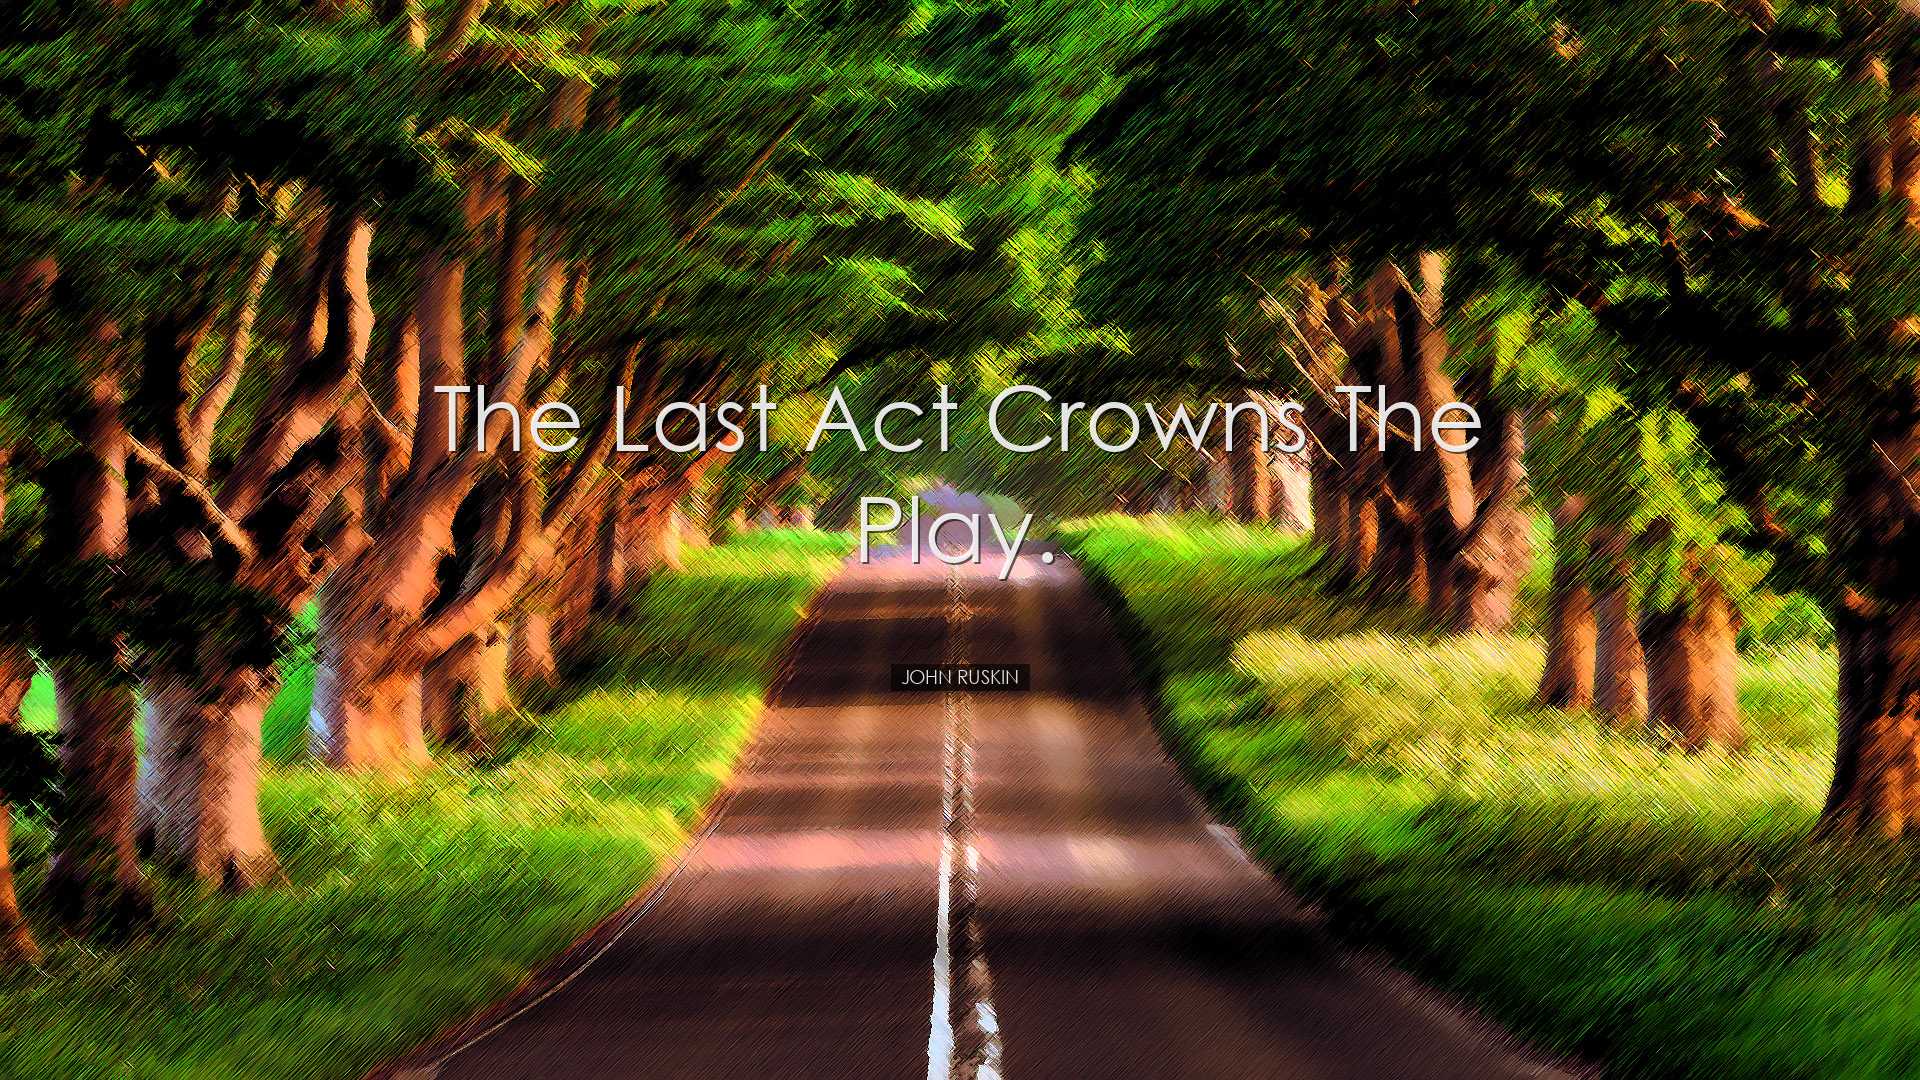 The last act crowns the play. - John Ruskin